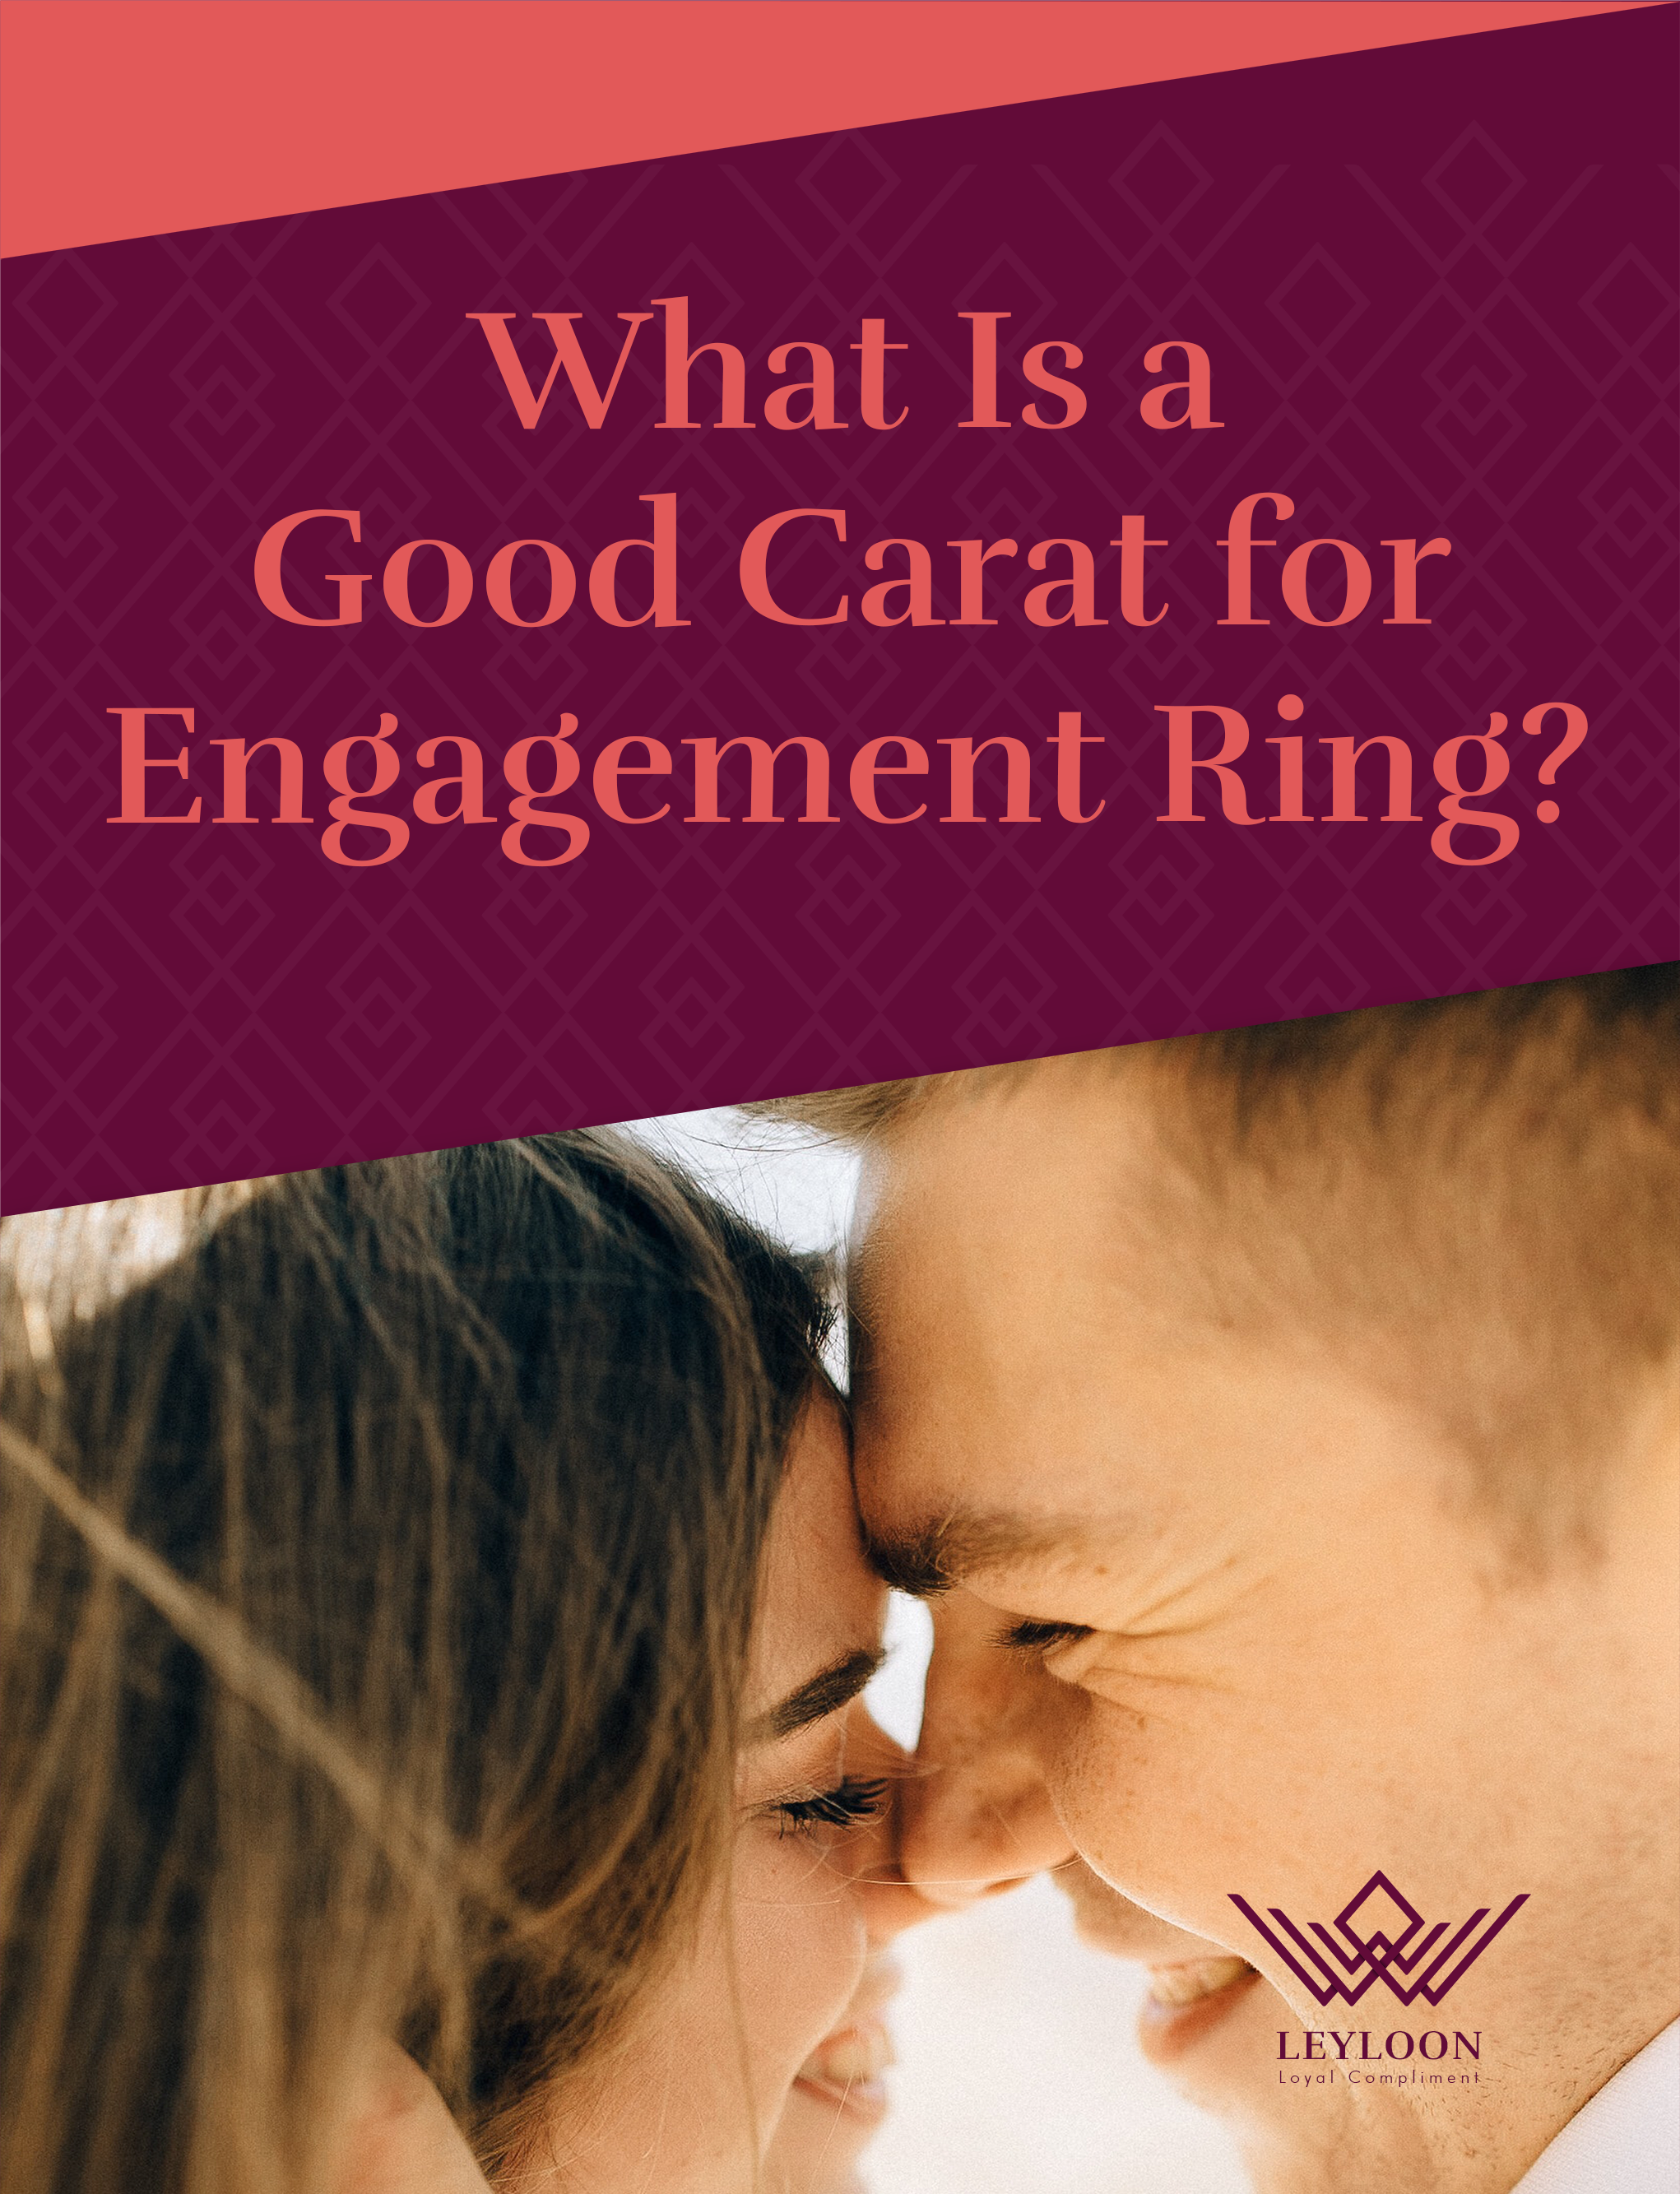 What Is a Good Carat for Engagement Ring?